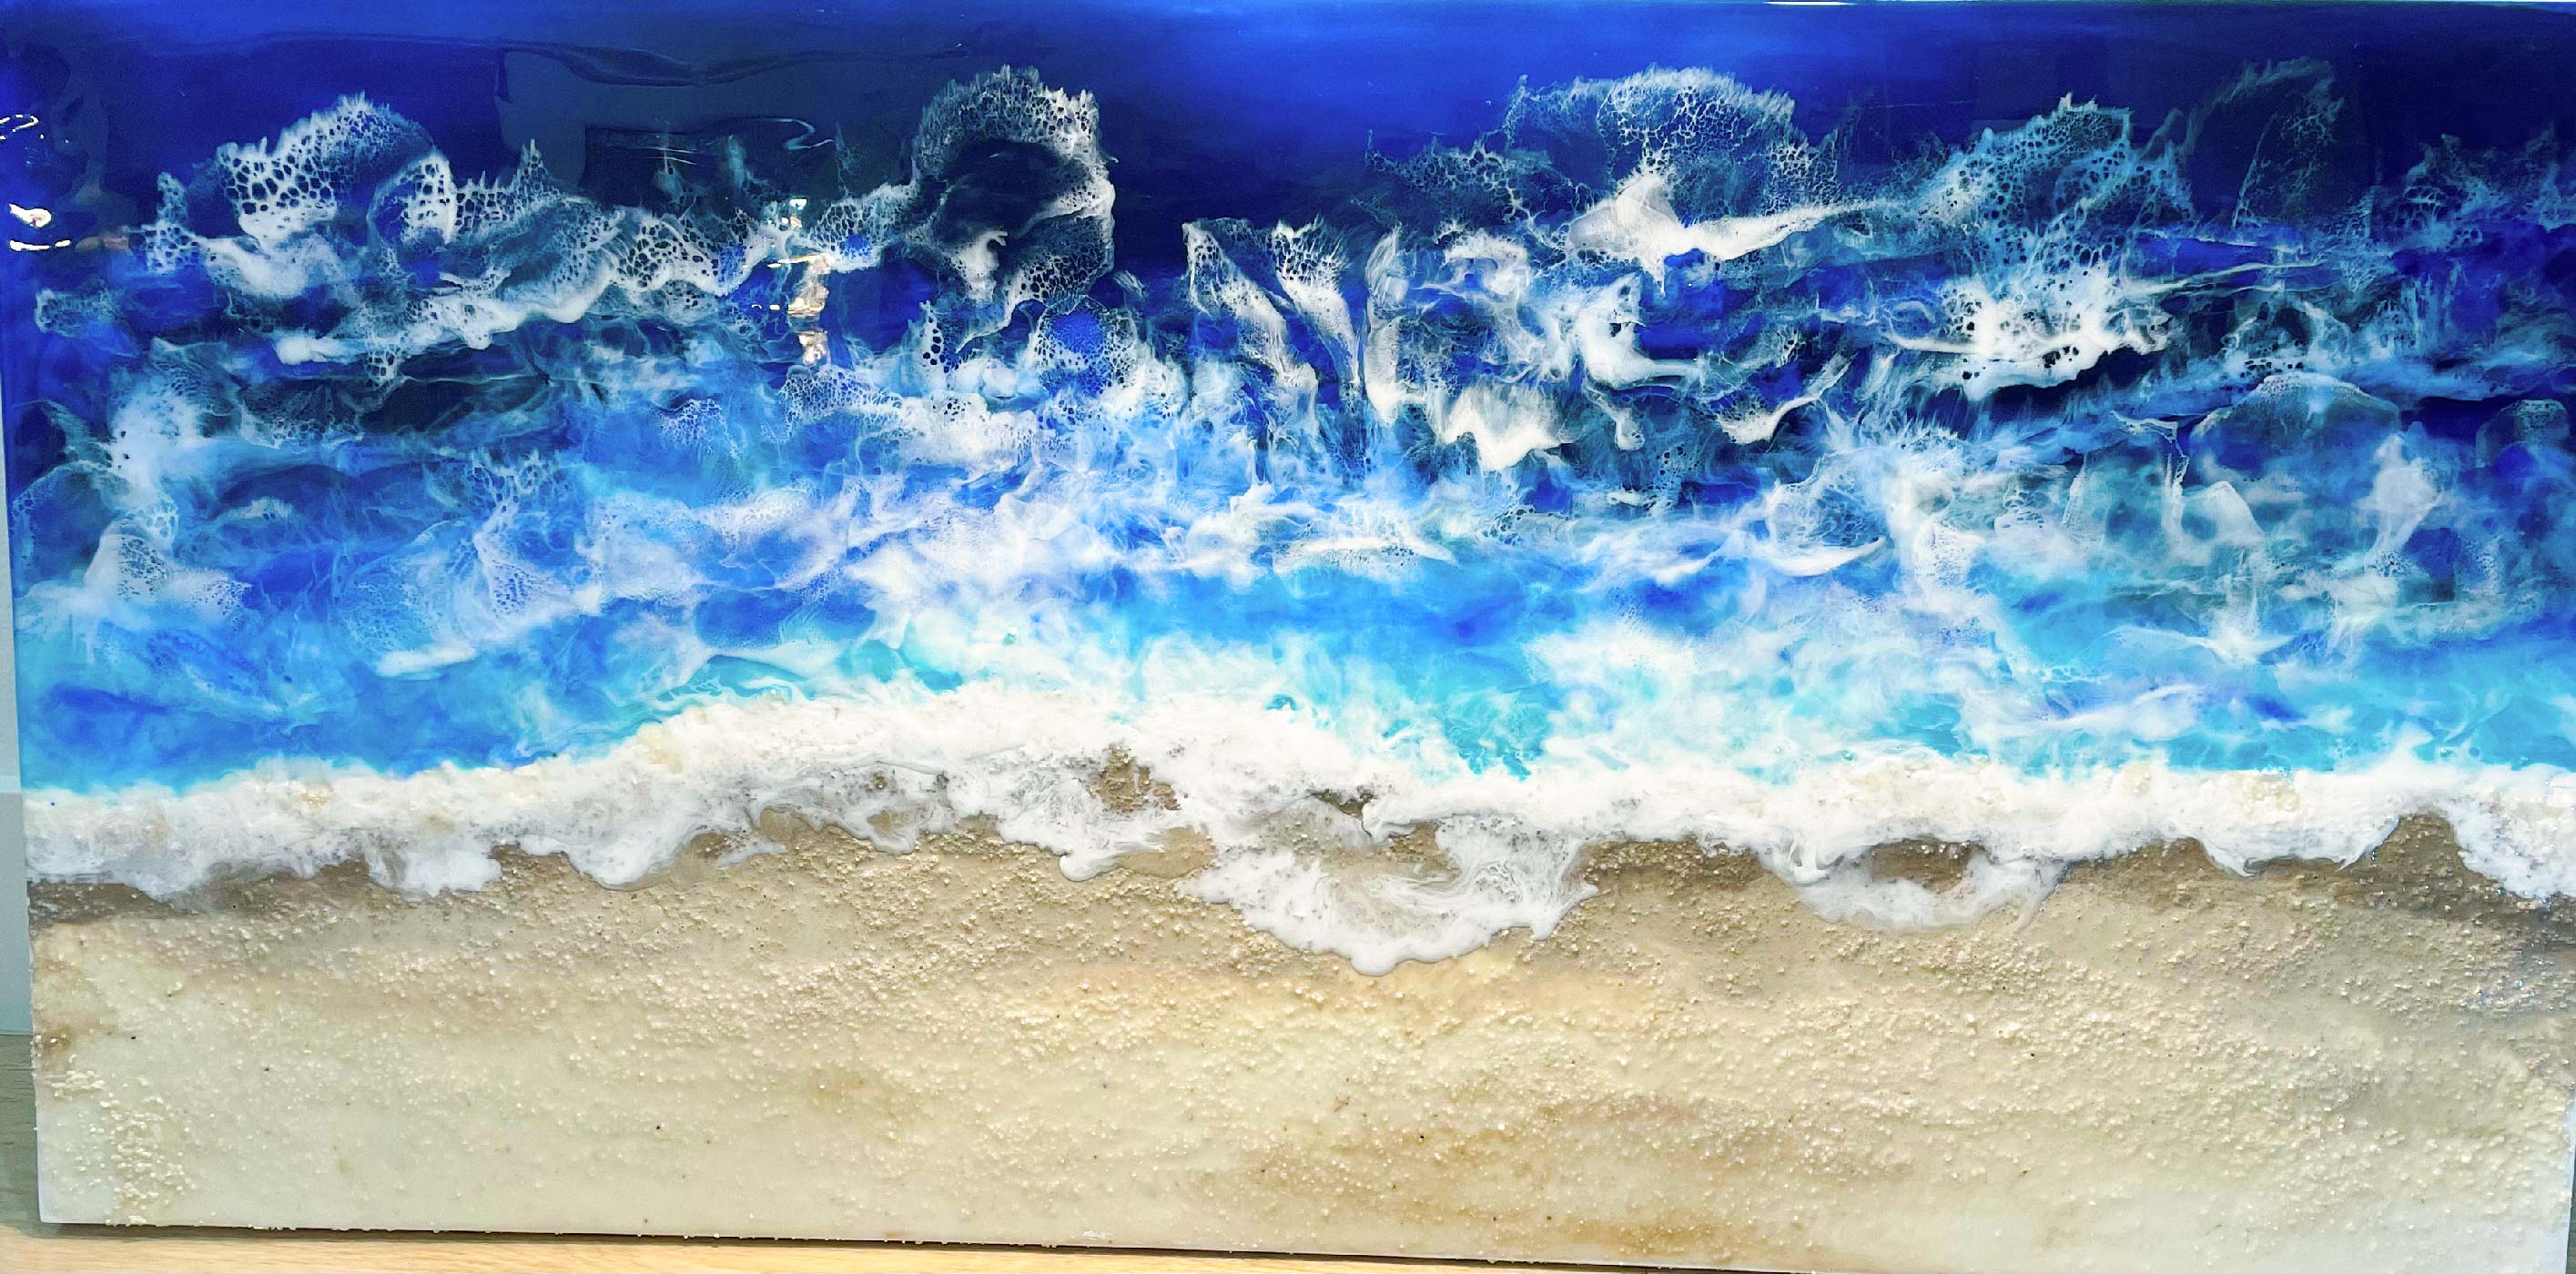 The sound of the ocean epoxy painting